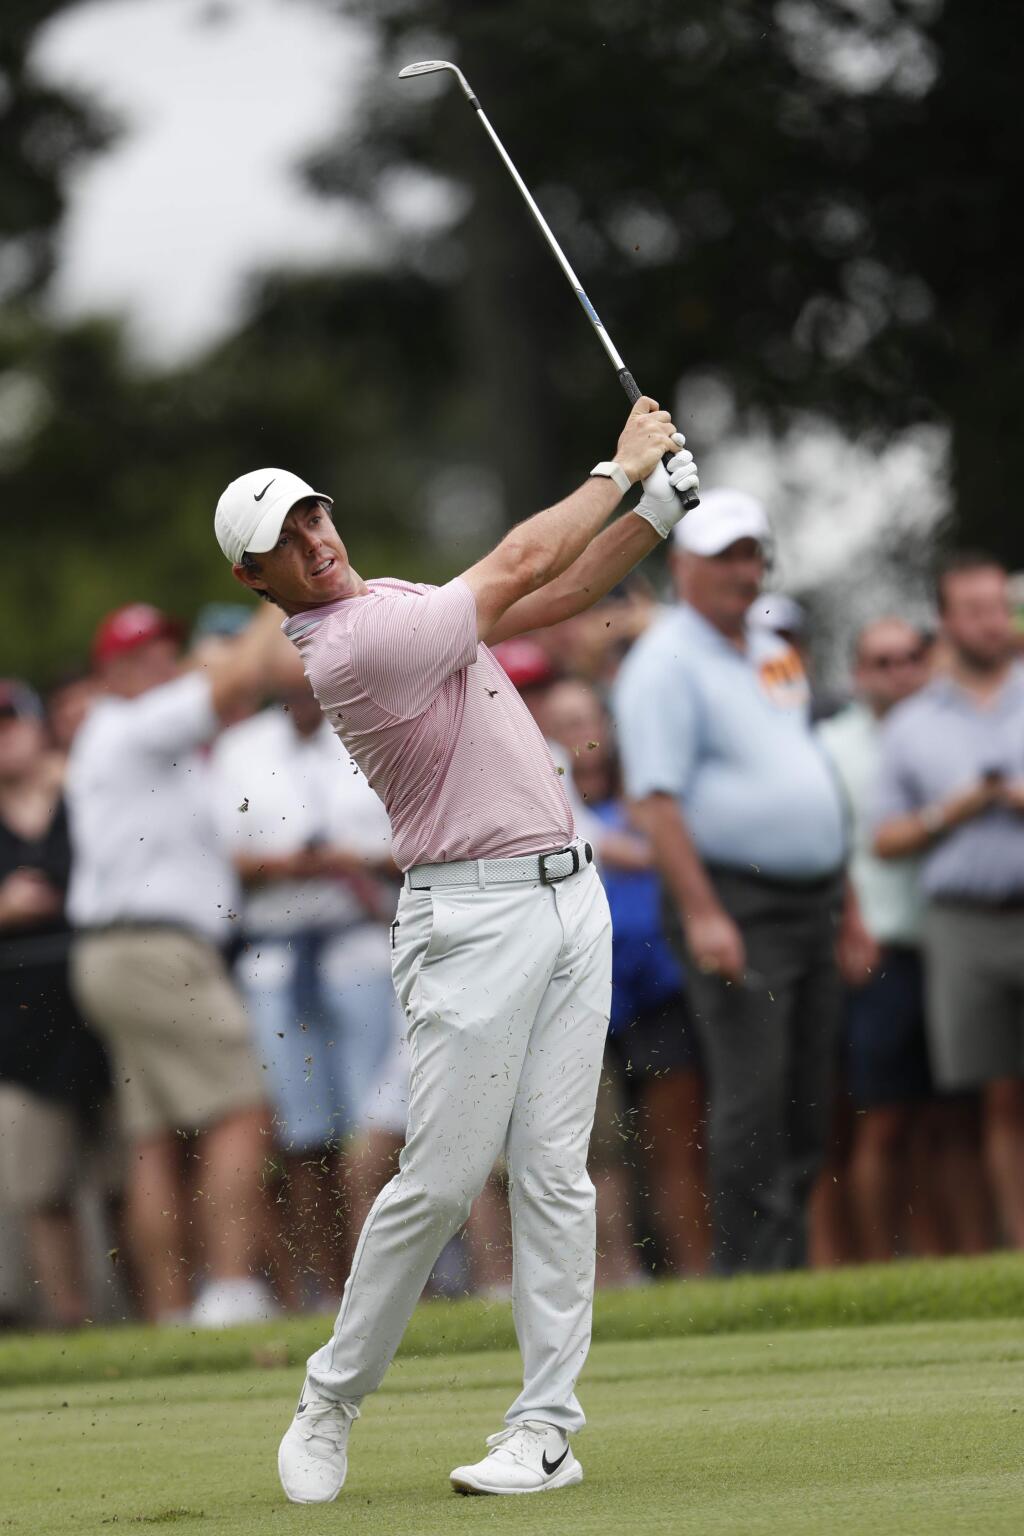 Rory McIlroy watches his shot on the fifth fairway during the final round of the Tour Championship golf tournament Sunday, Aug. 25, 2019, at East Lake Golf Club in Atlanta. (AP Photo/John Bazemore)